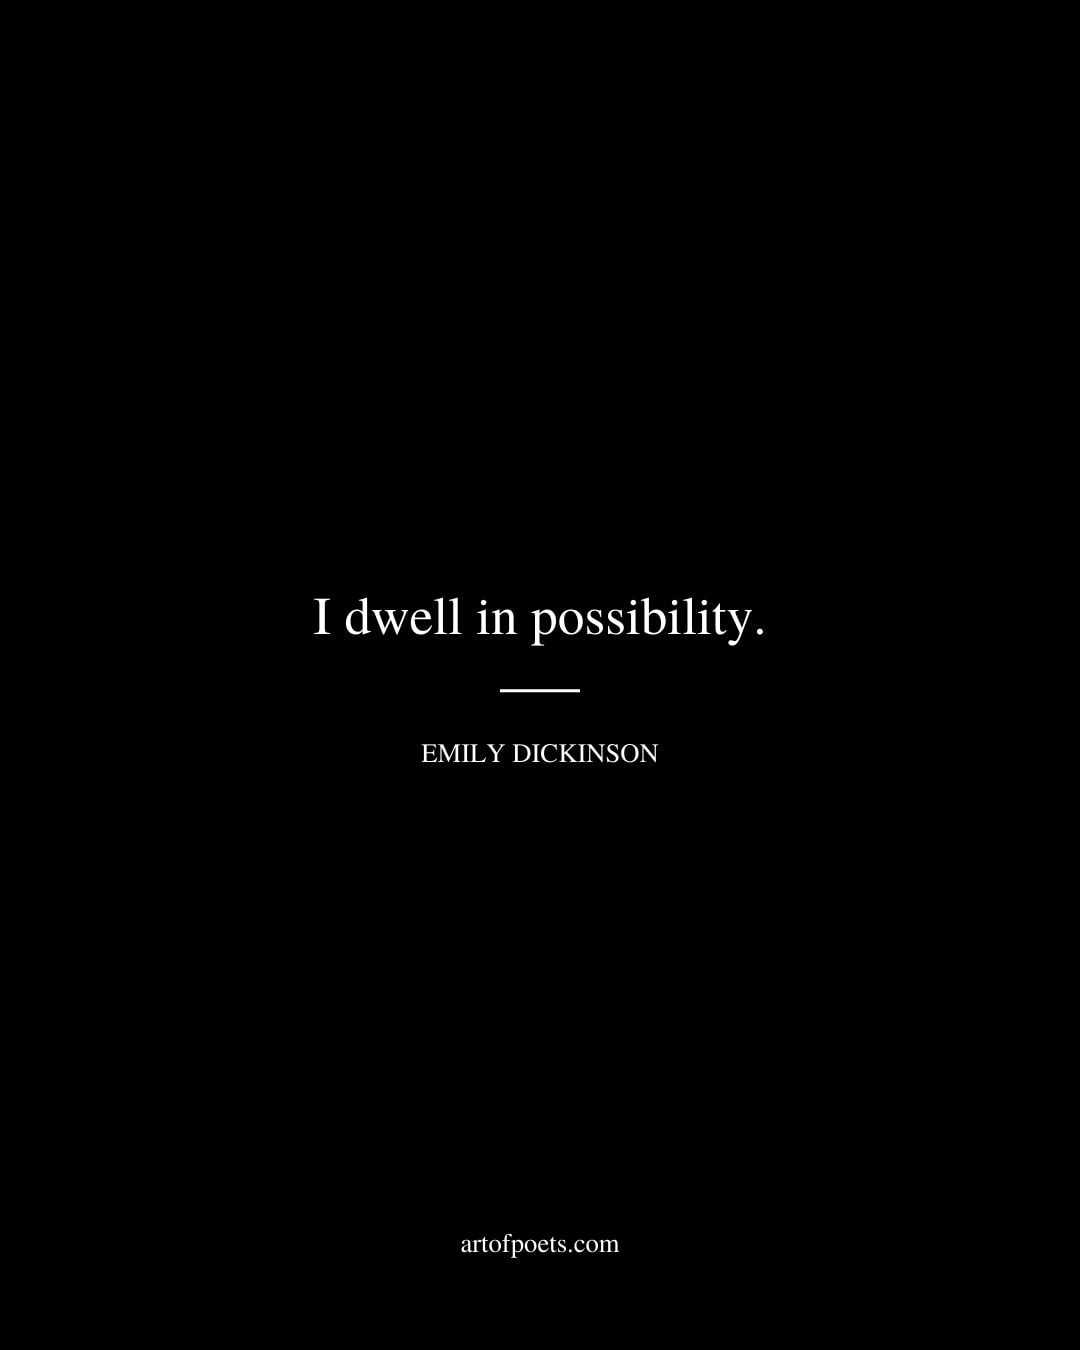 I dwell in possibility. Emily Dickinson